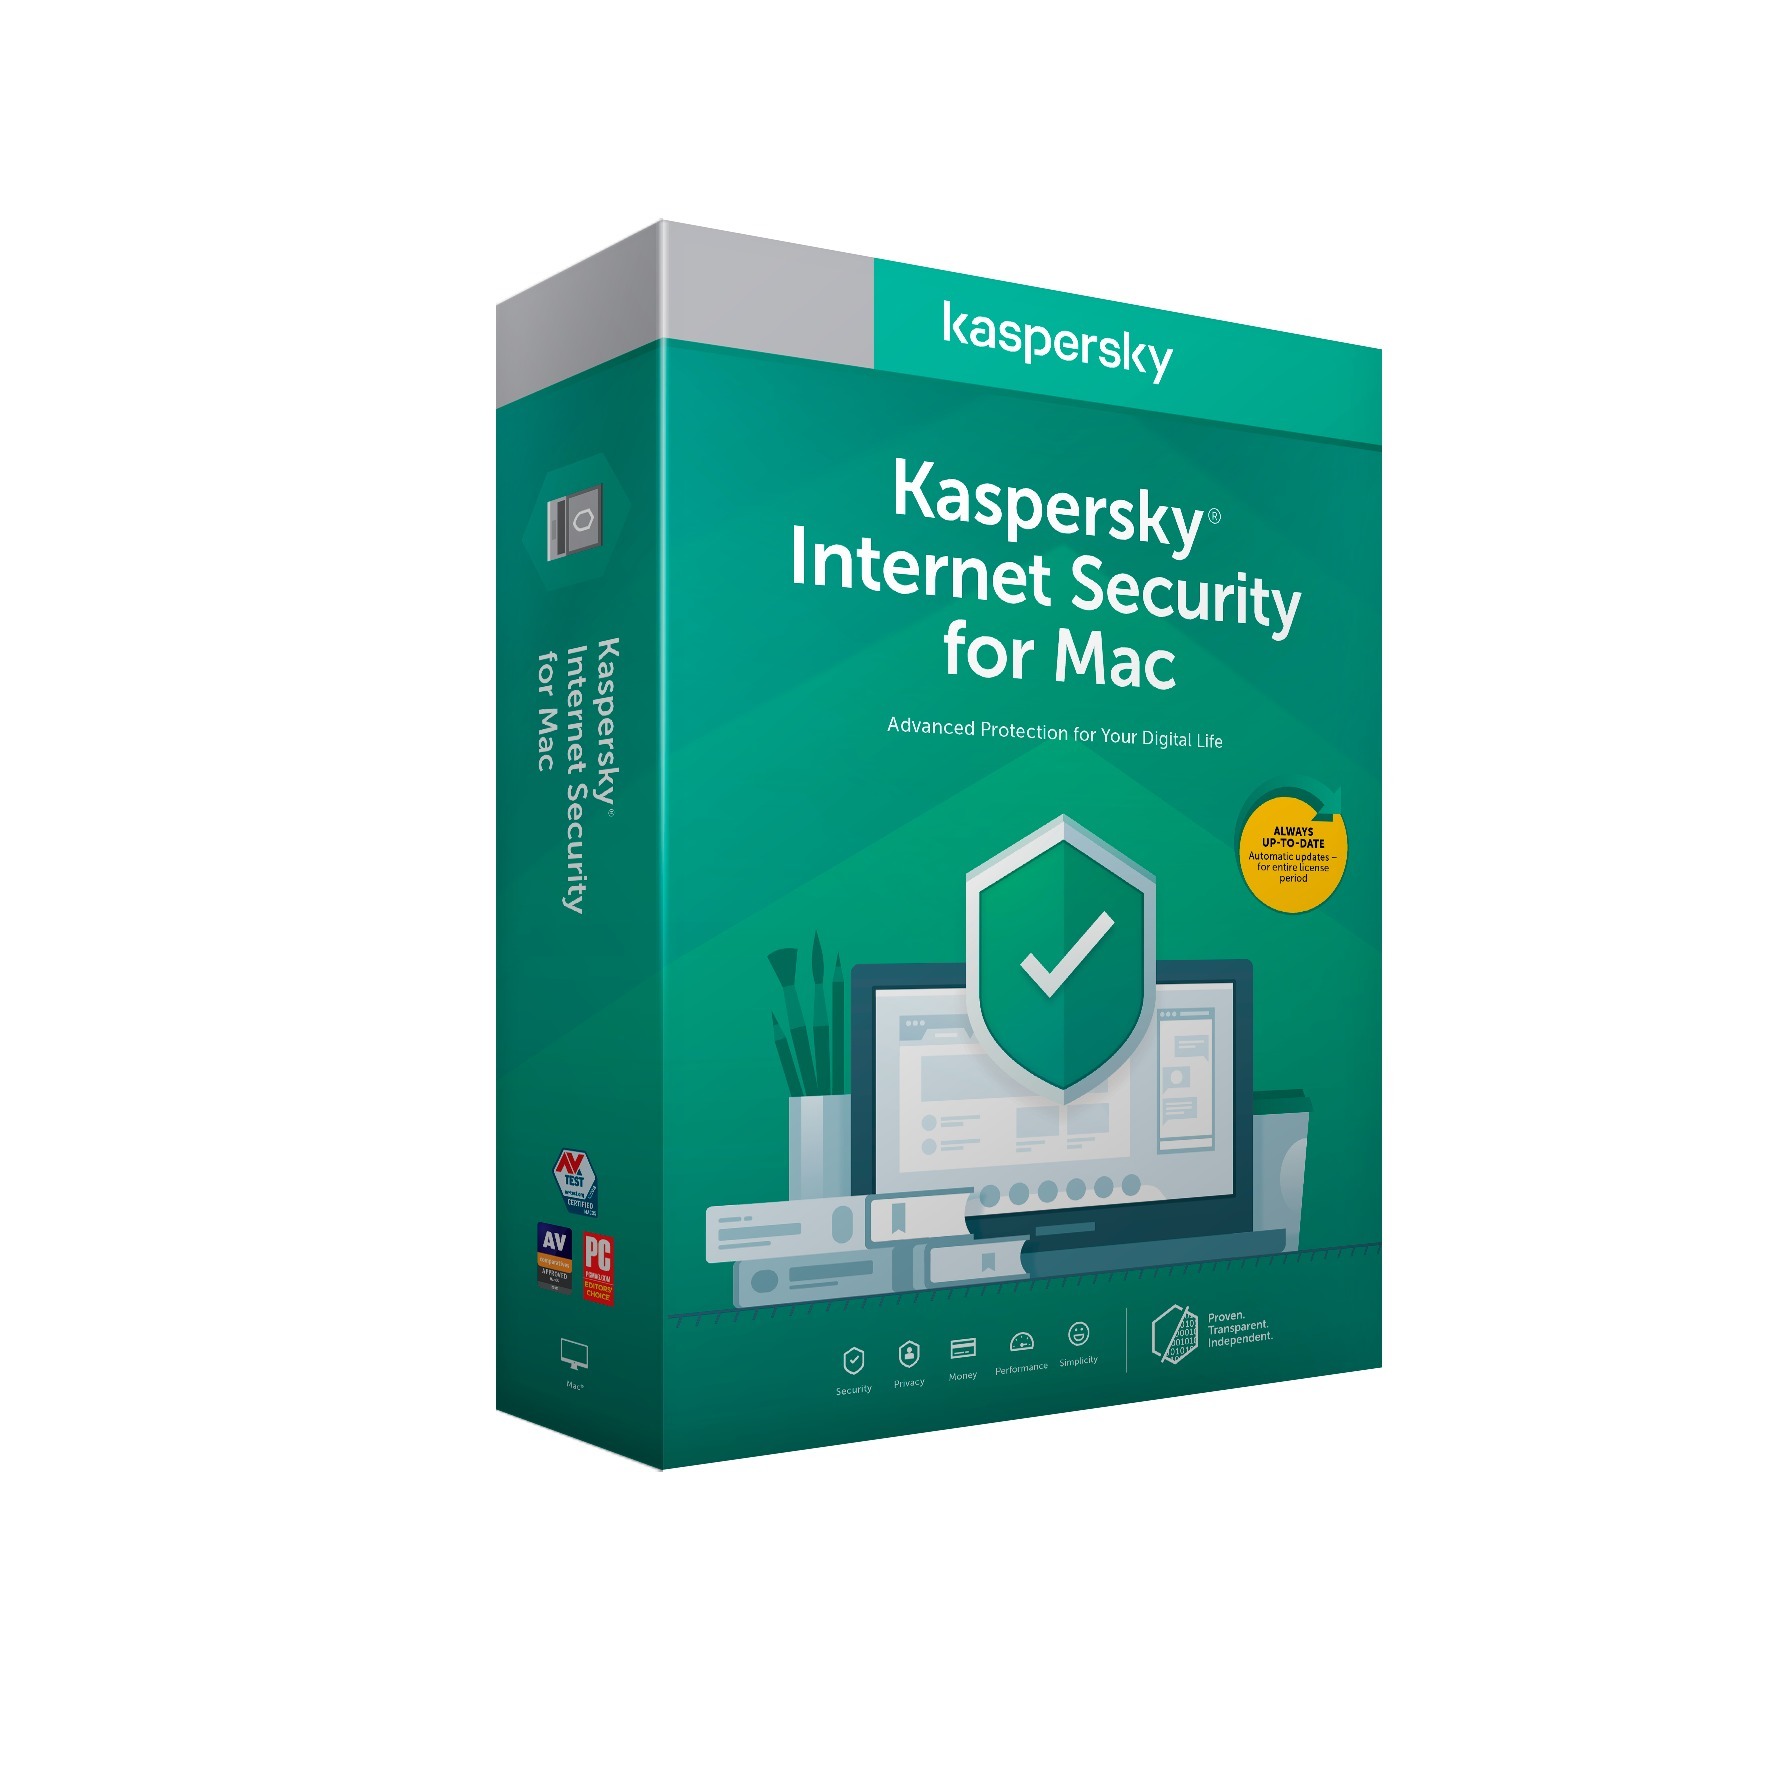 pc magazine internet protection reviews 2018 for a mac